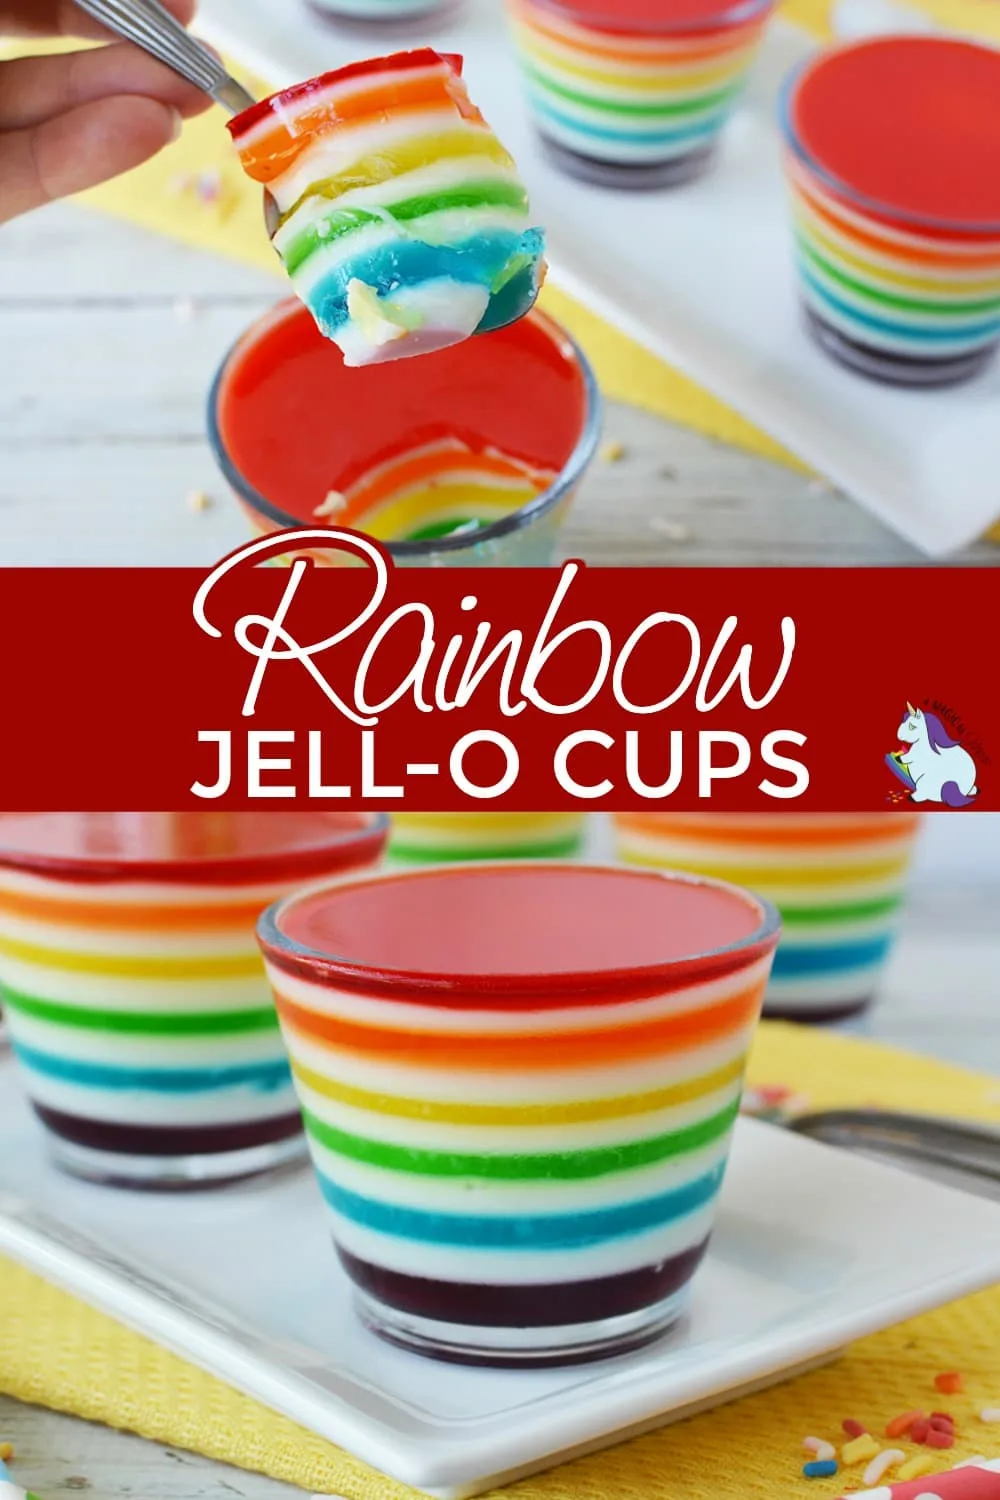 Jell-o layered into cups in a rainbow.